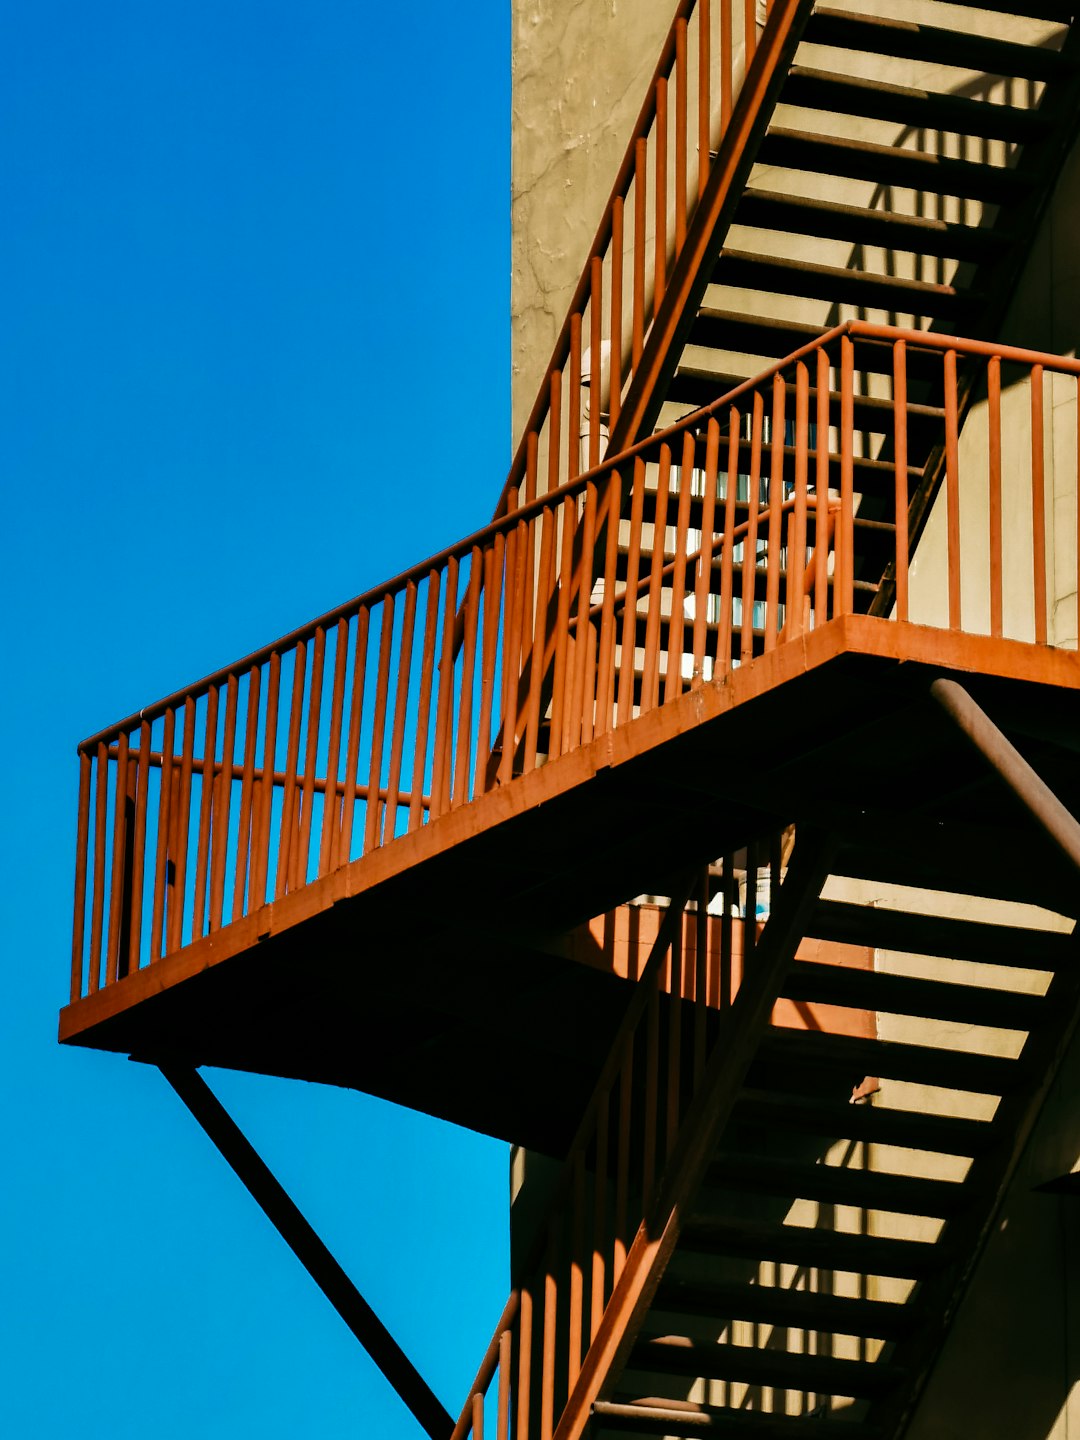 brown wooden staircase under blue sky during daytime